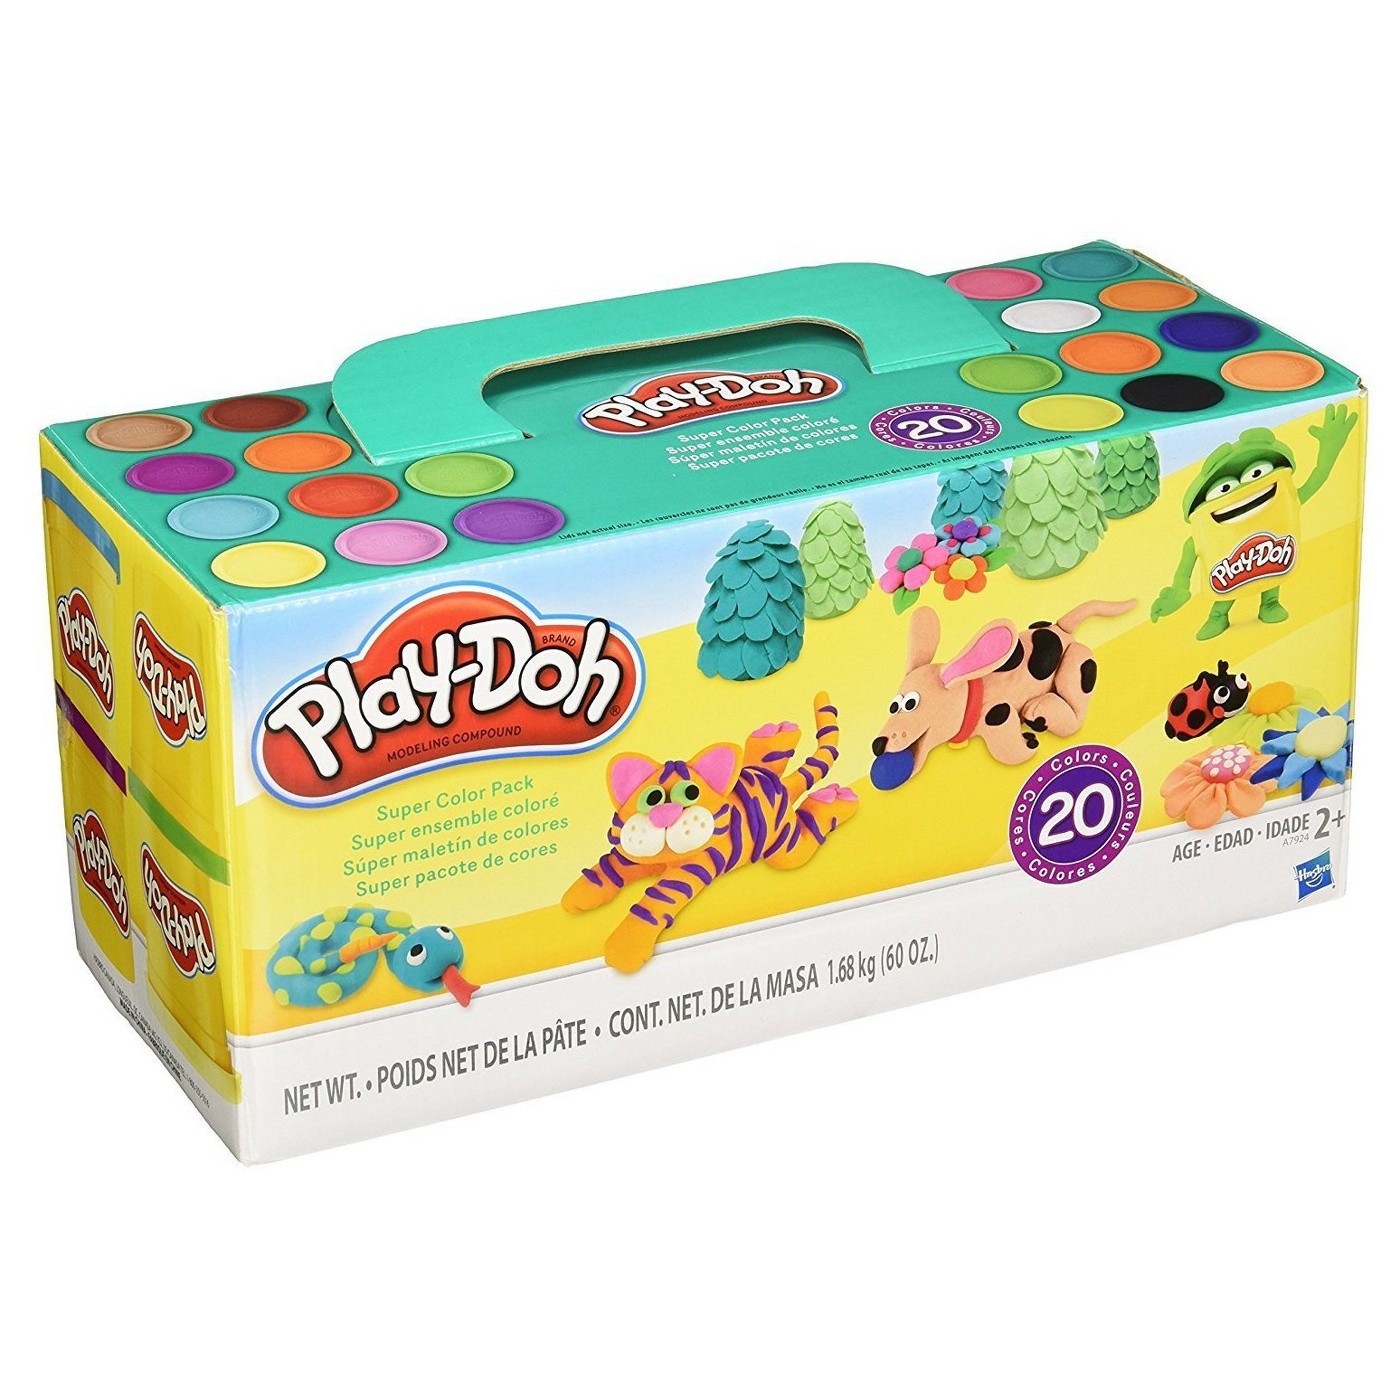 Play-Doh Super Color Pack (20PK) - image 1 of 2